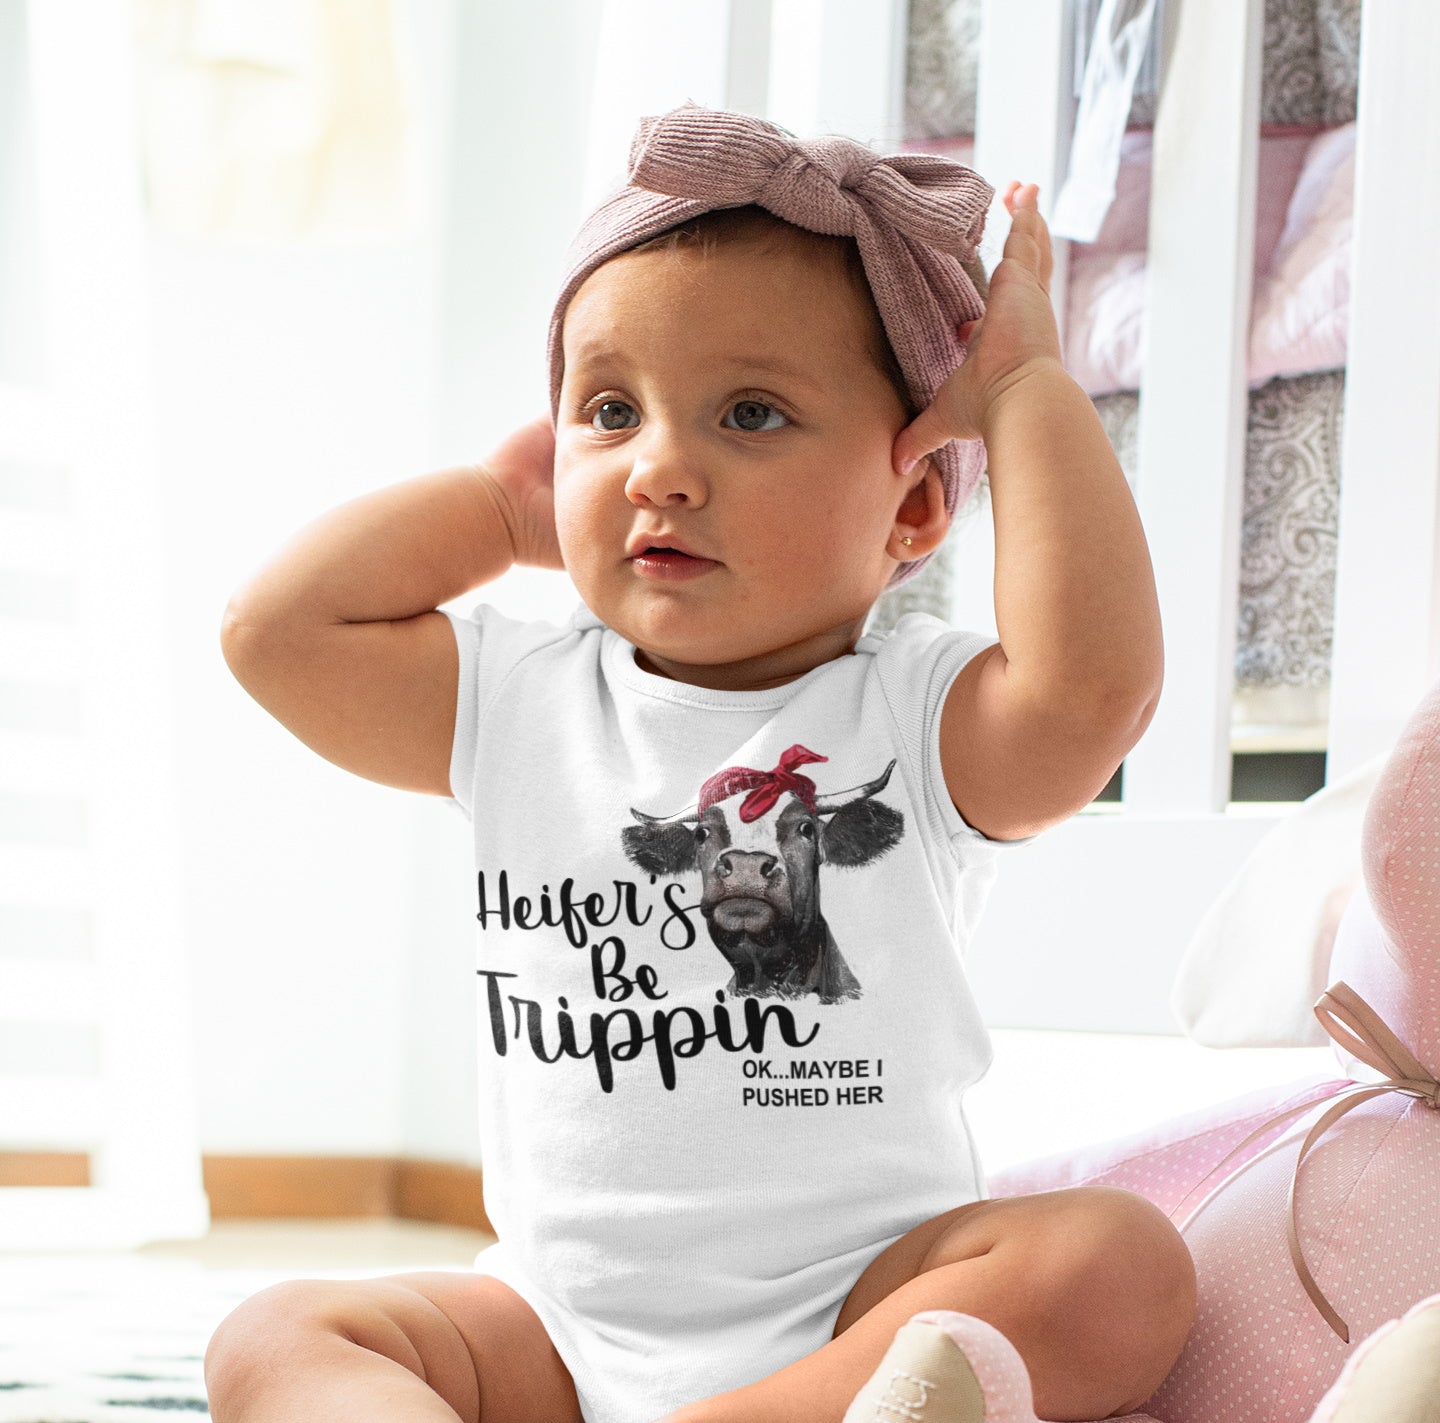 Heifers Be Trippin, Okay Maybe I Pushed Her, Funny Cow Tripping Farm Adult Kids Toddler Baby Shirt